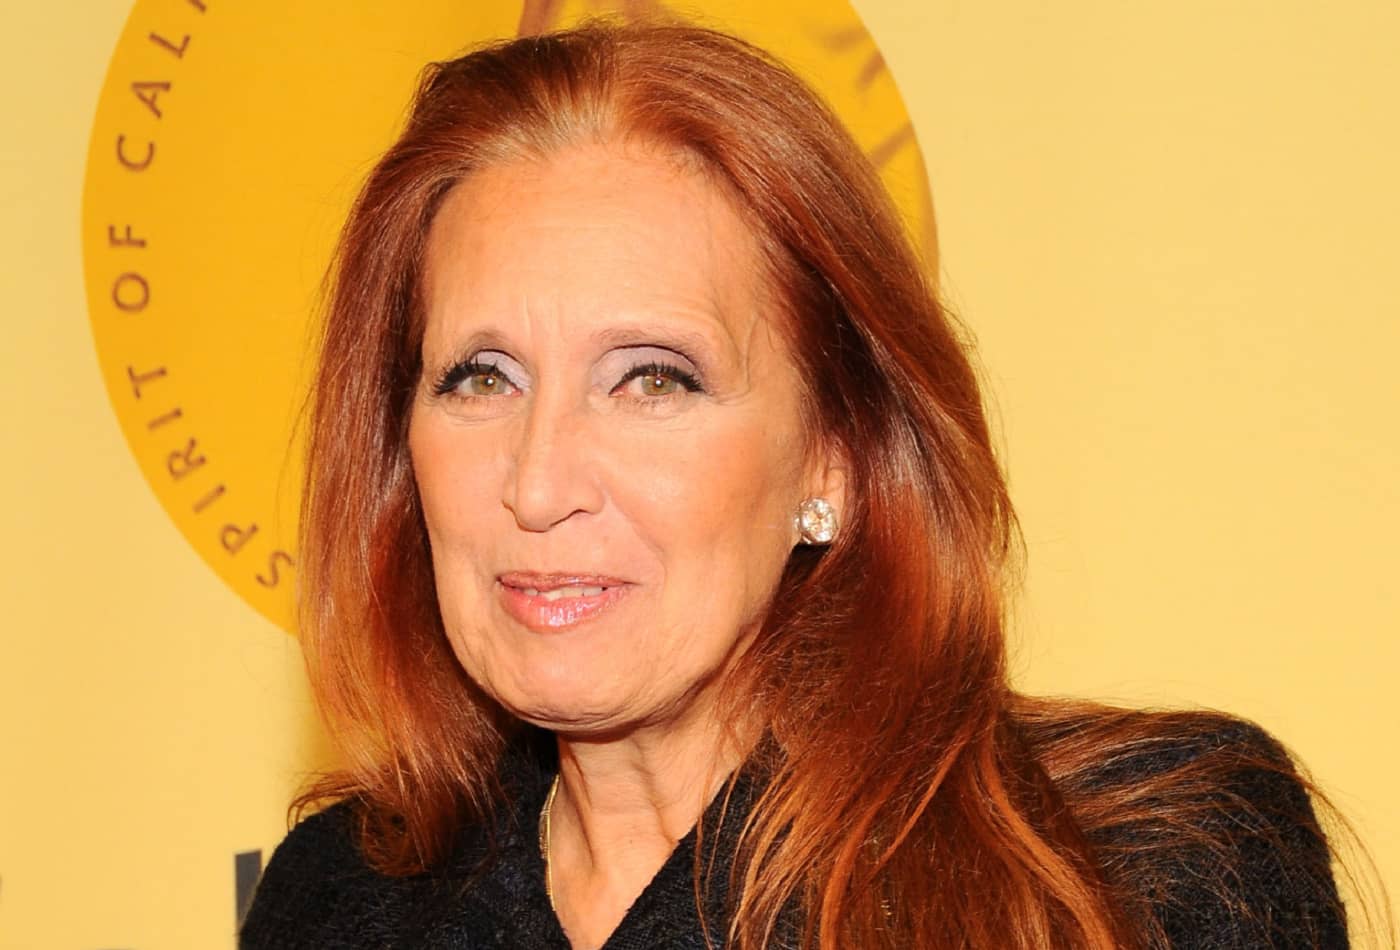 Danielle Steel has published 179 books and writes 20-22 ...